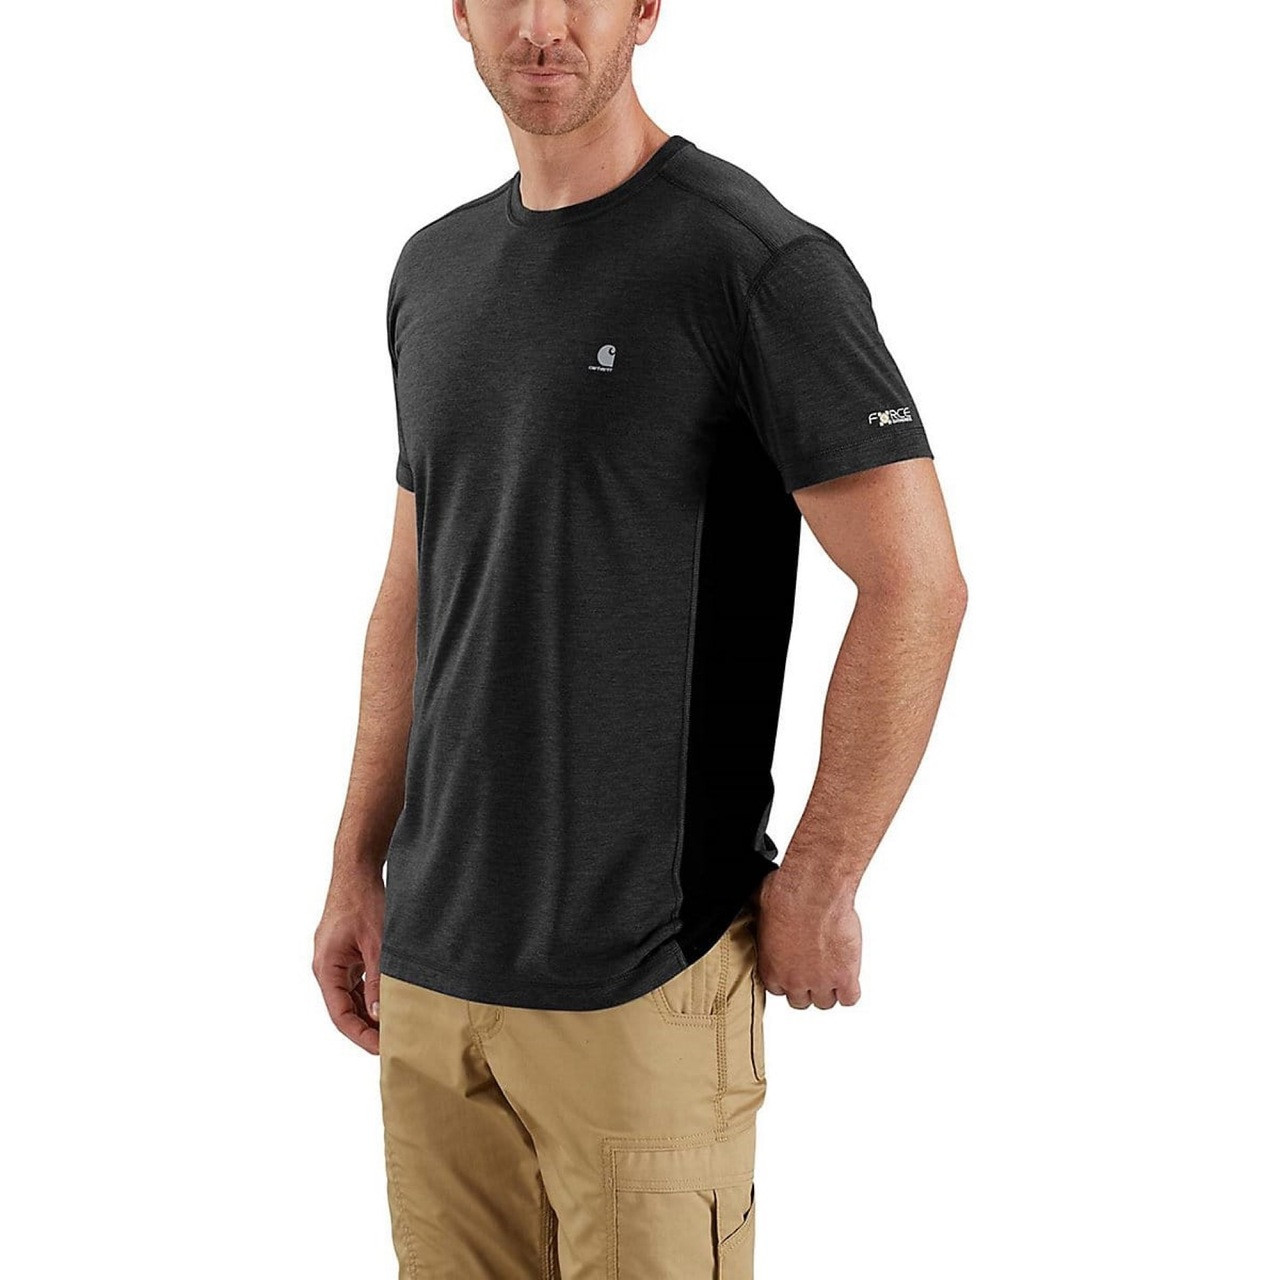 Carhartt Force Tees : Old vs New 